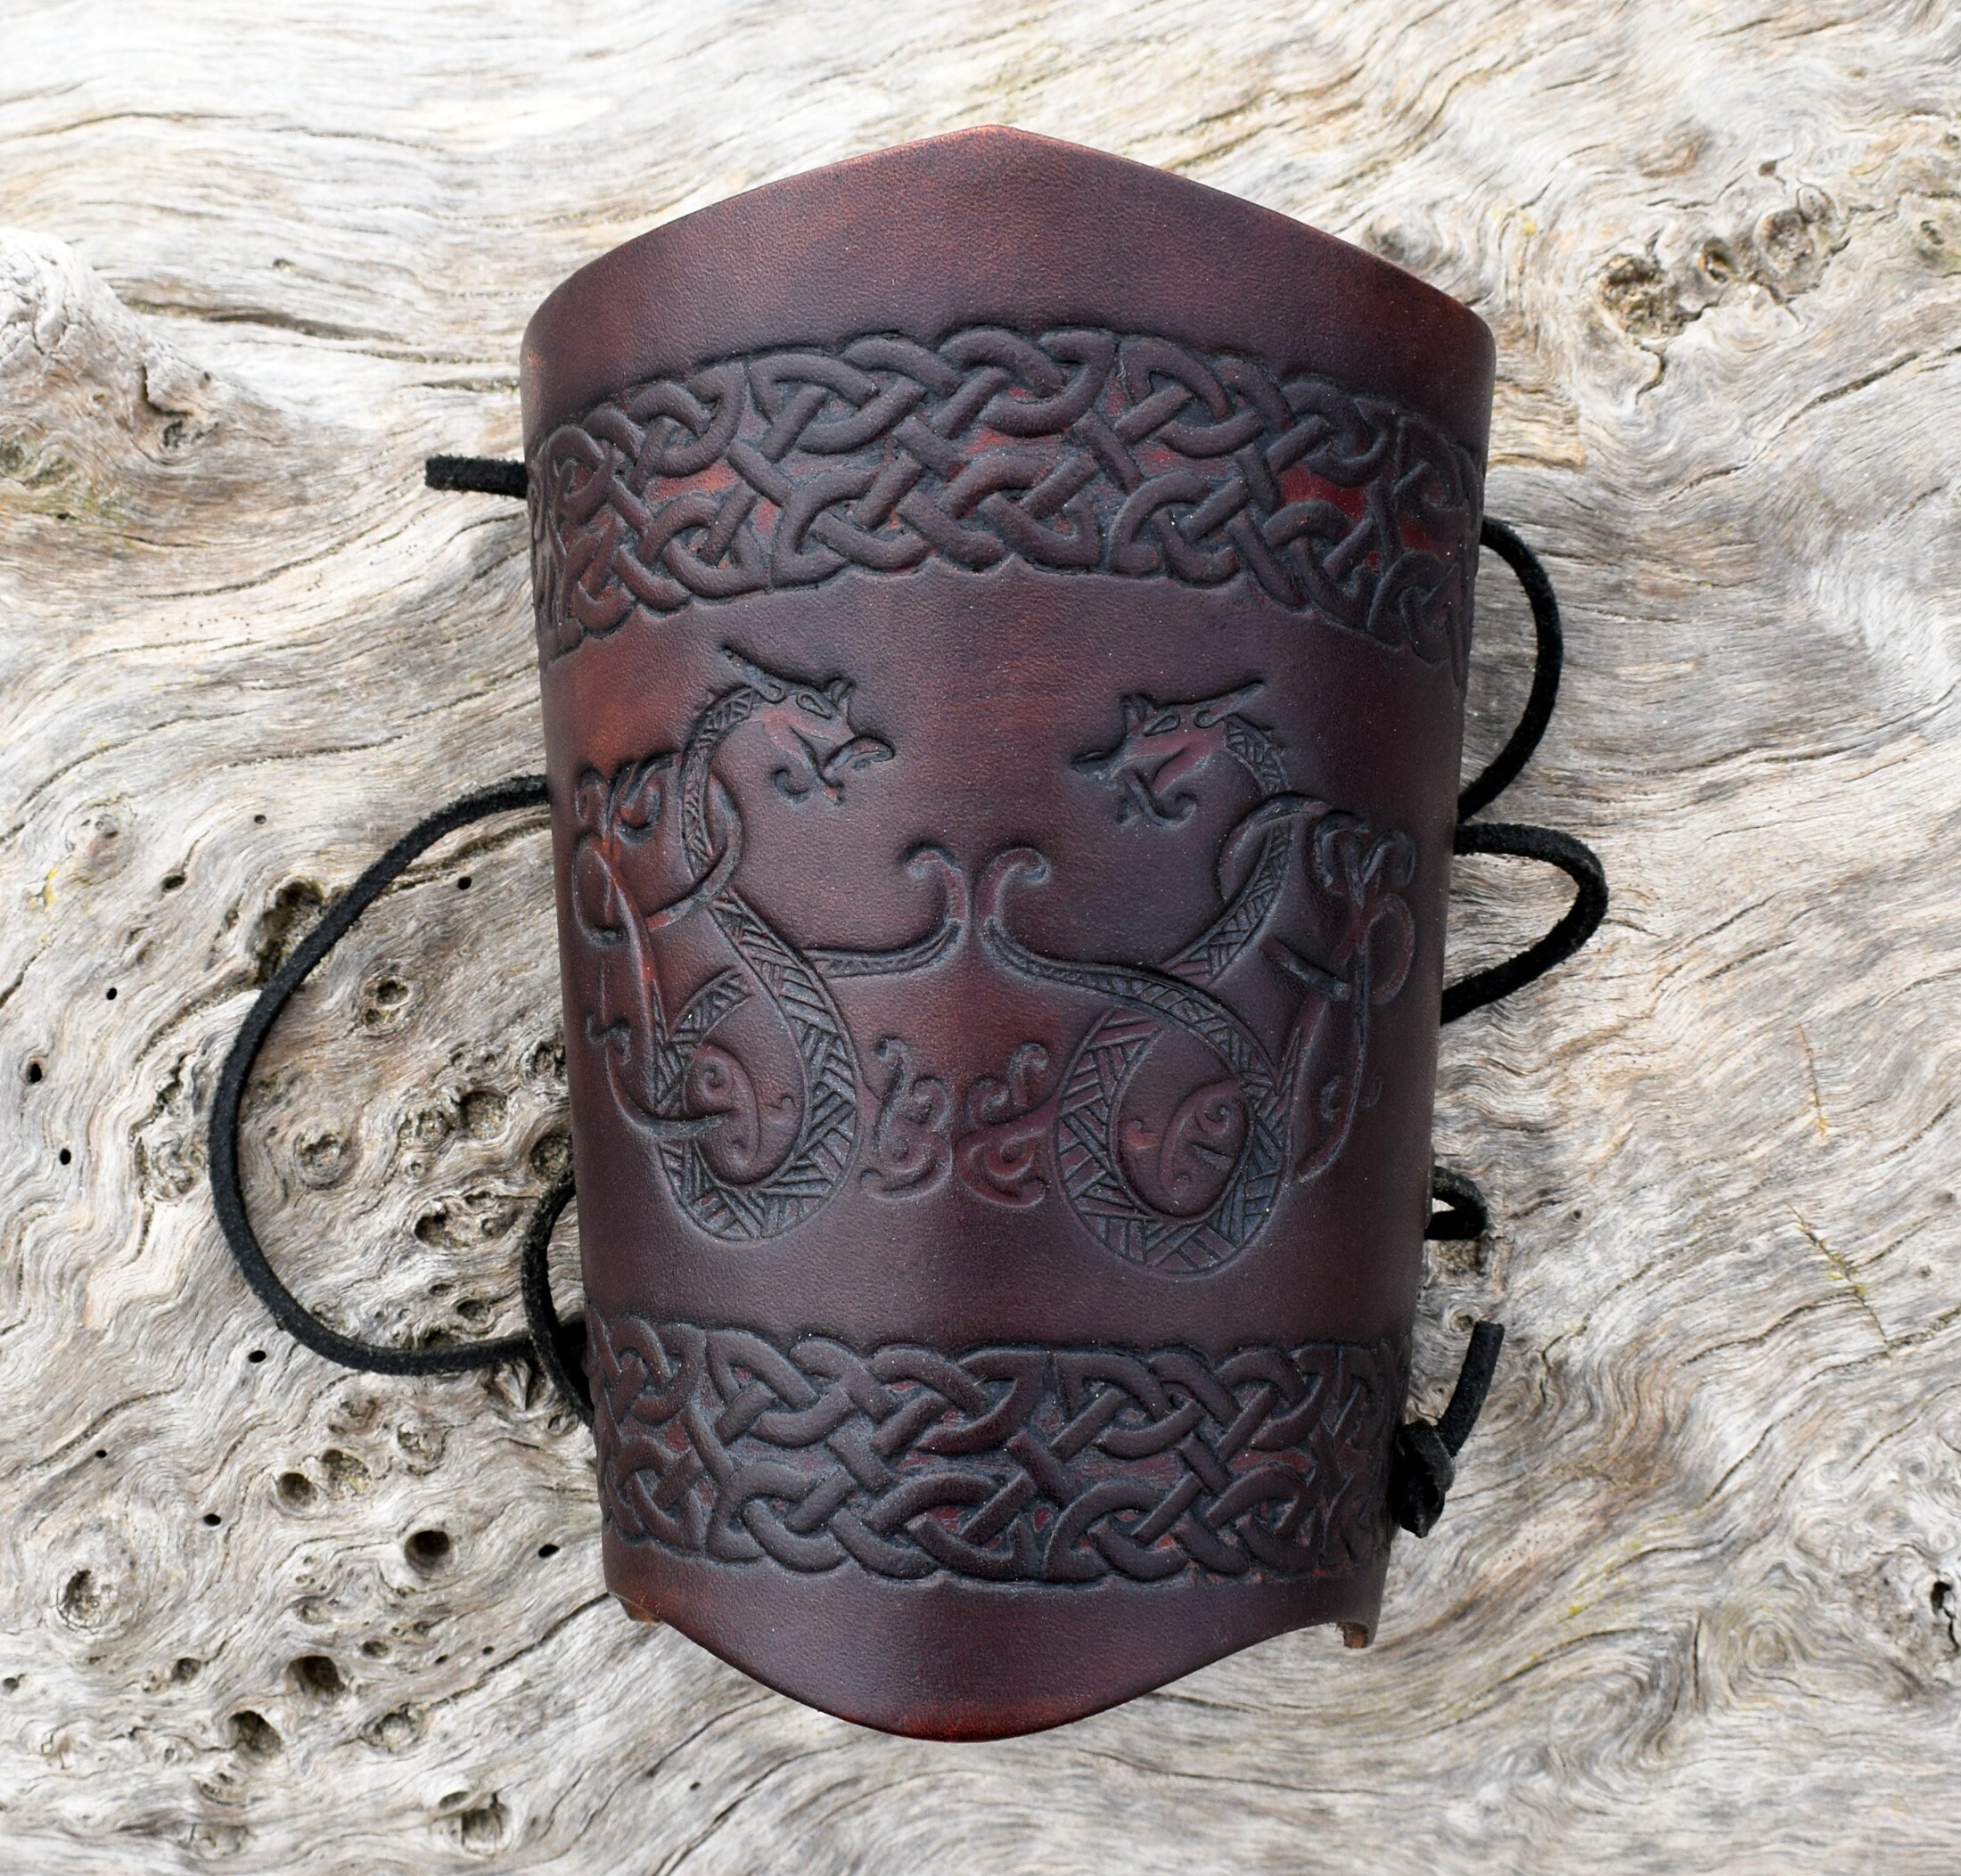 Viking bracers with etched brass accents “Gudrun the Wolfdottir